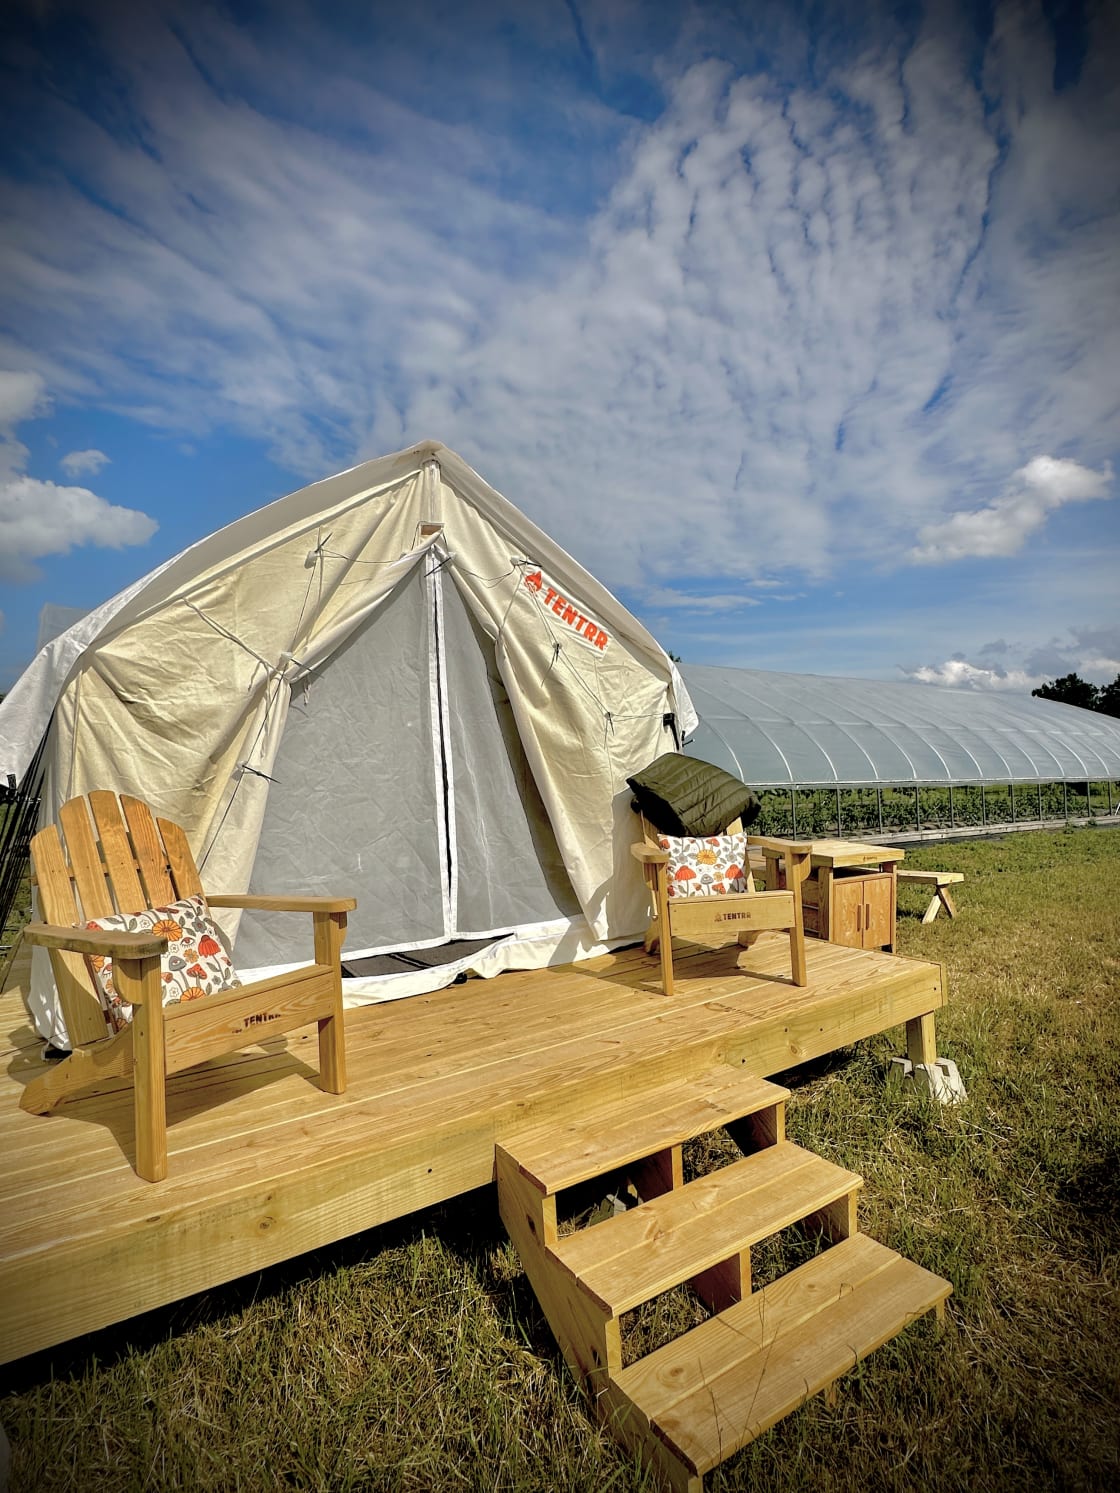 Allenbrooke Farms Glamping